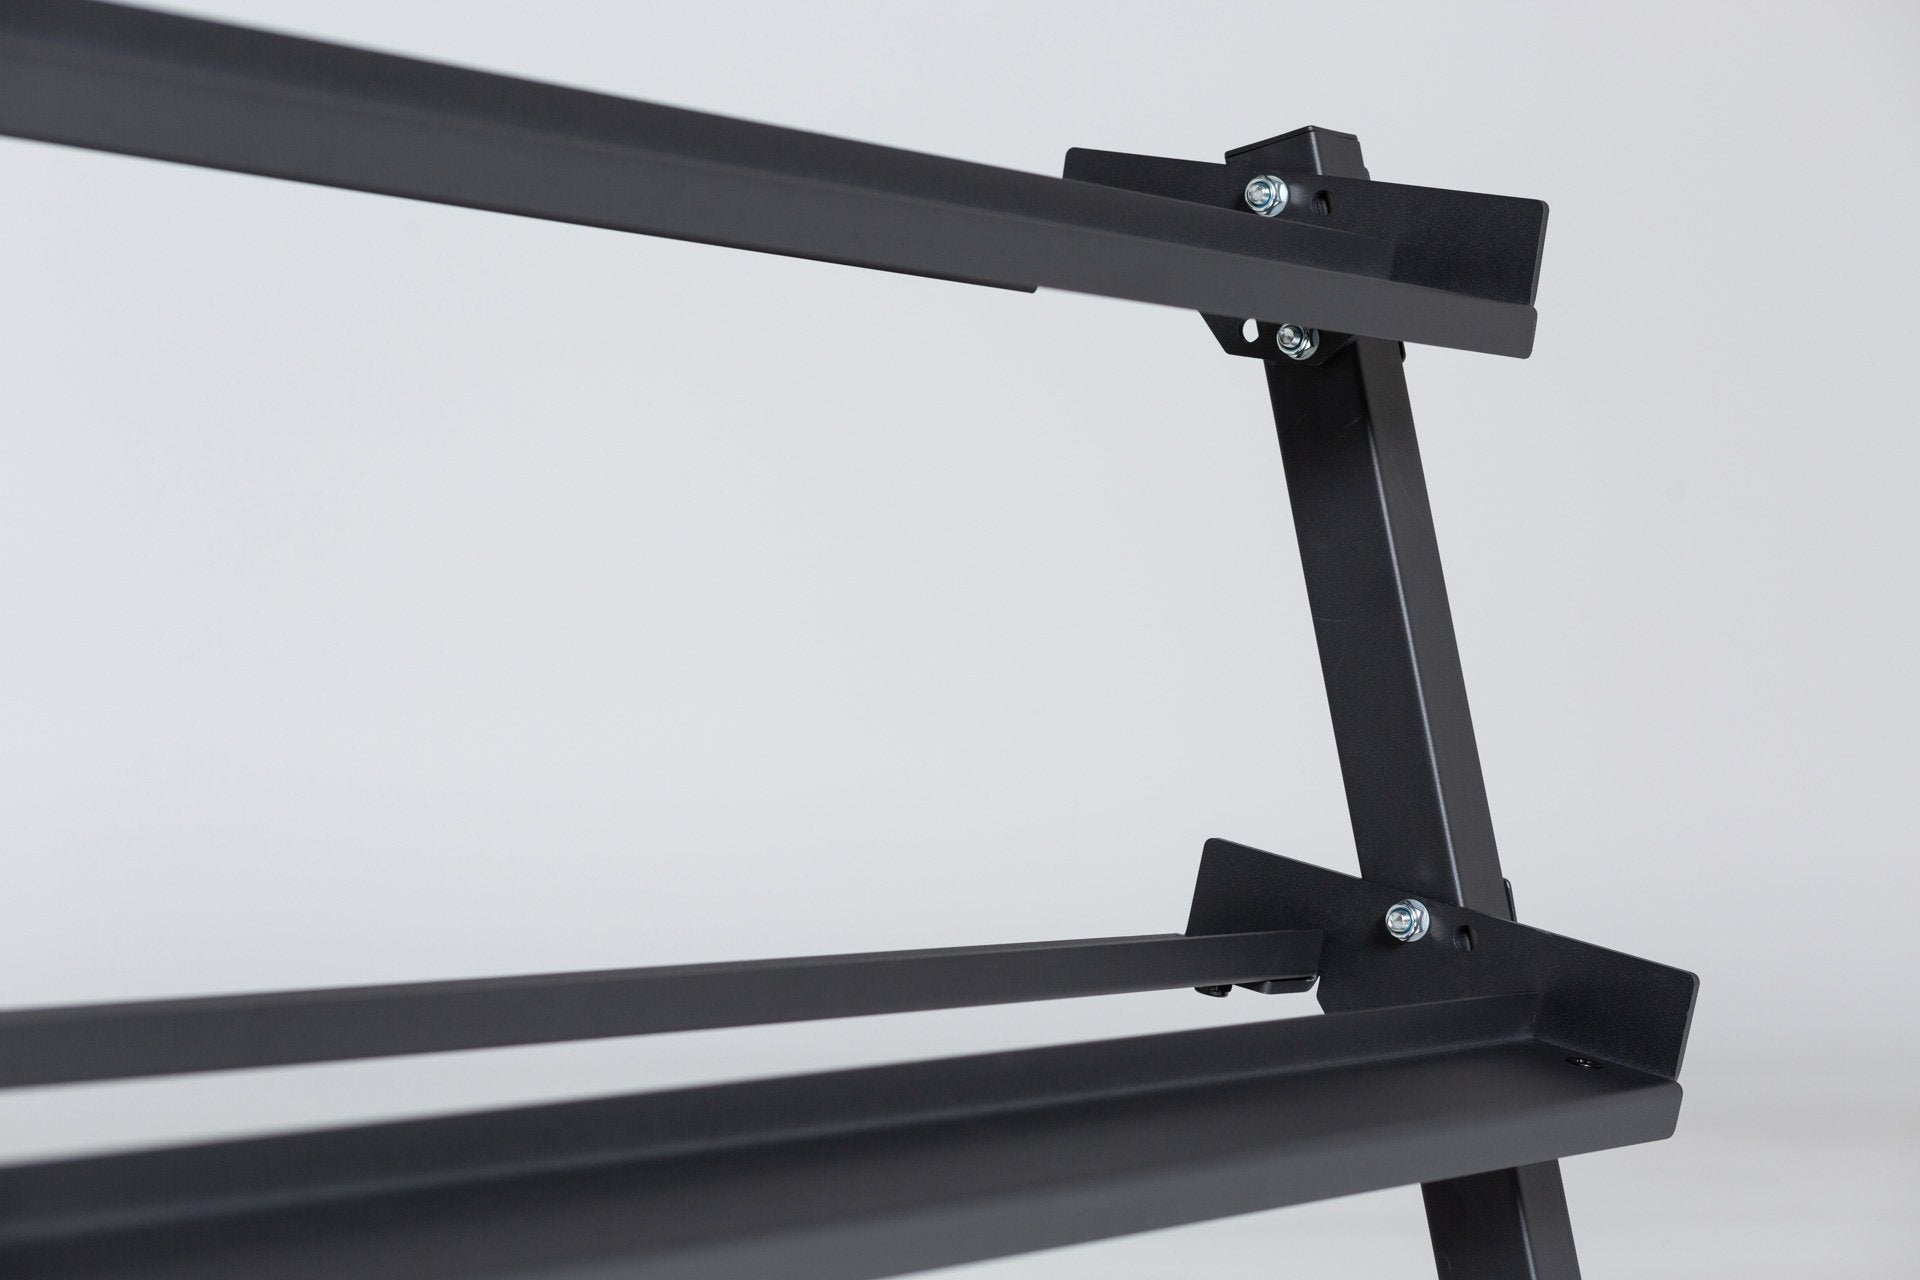 Close-up angled view of the right side of the top and middle shelf and the side support post of a REP Dumbbell Rack.